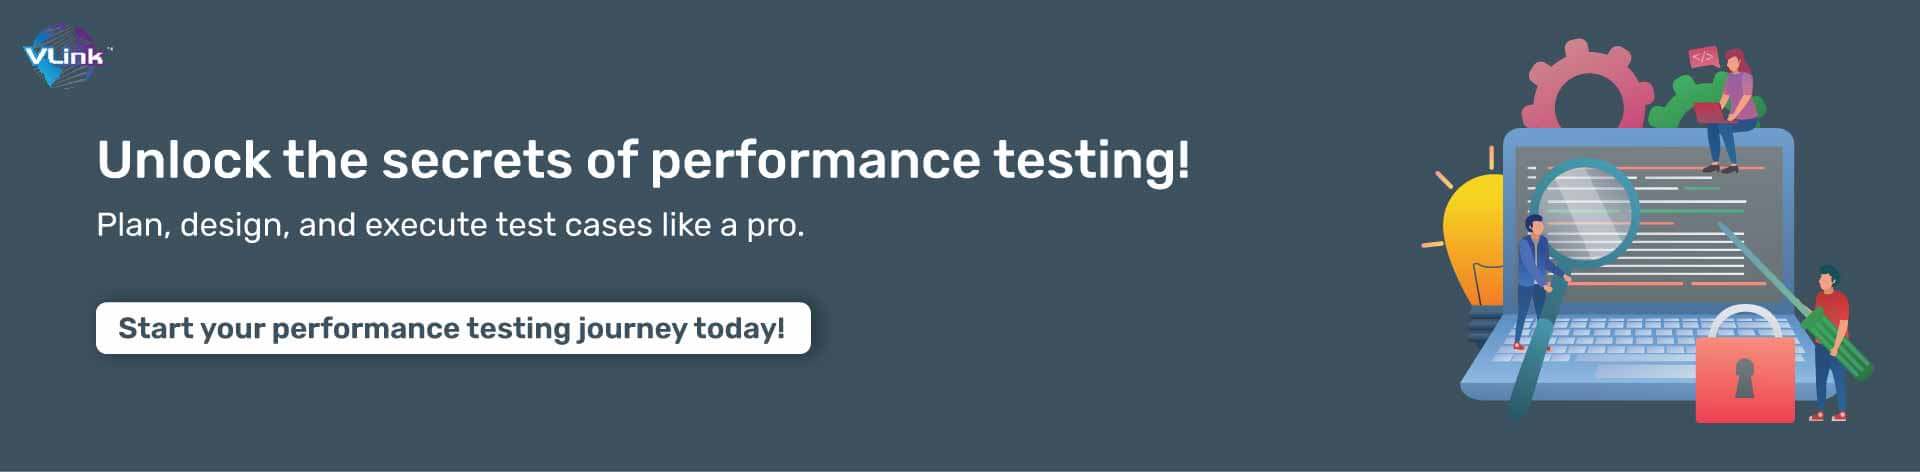 plan-design-and-execute-test-cases-for-performance-testing-cta1